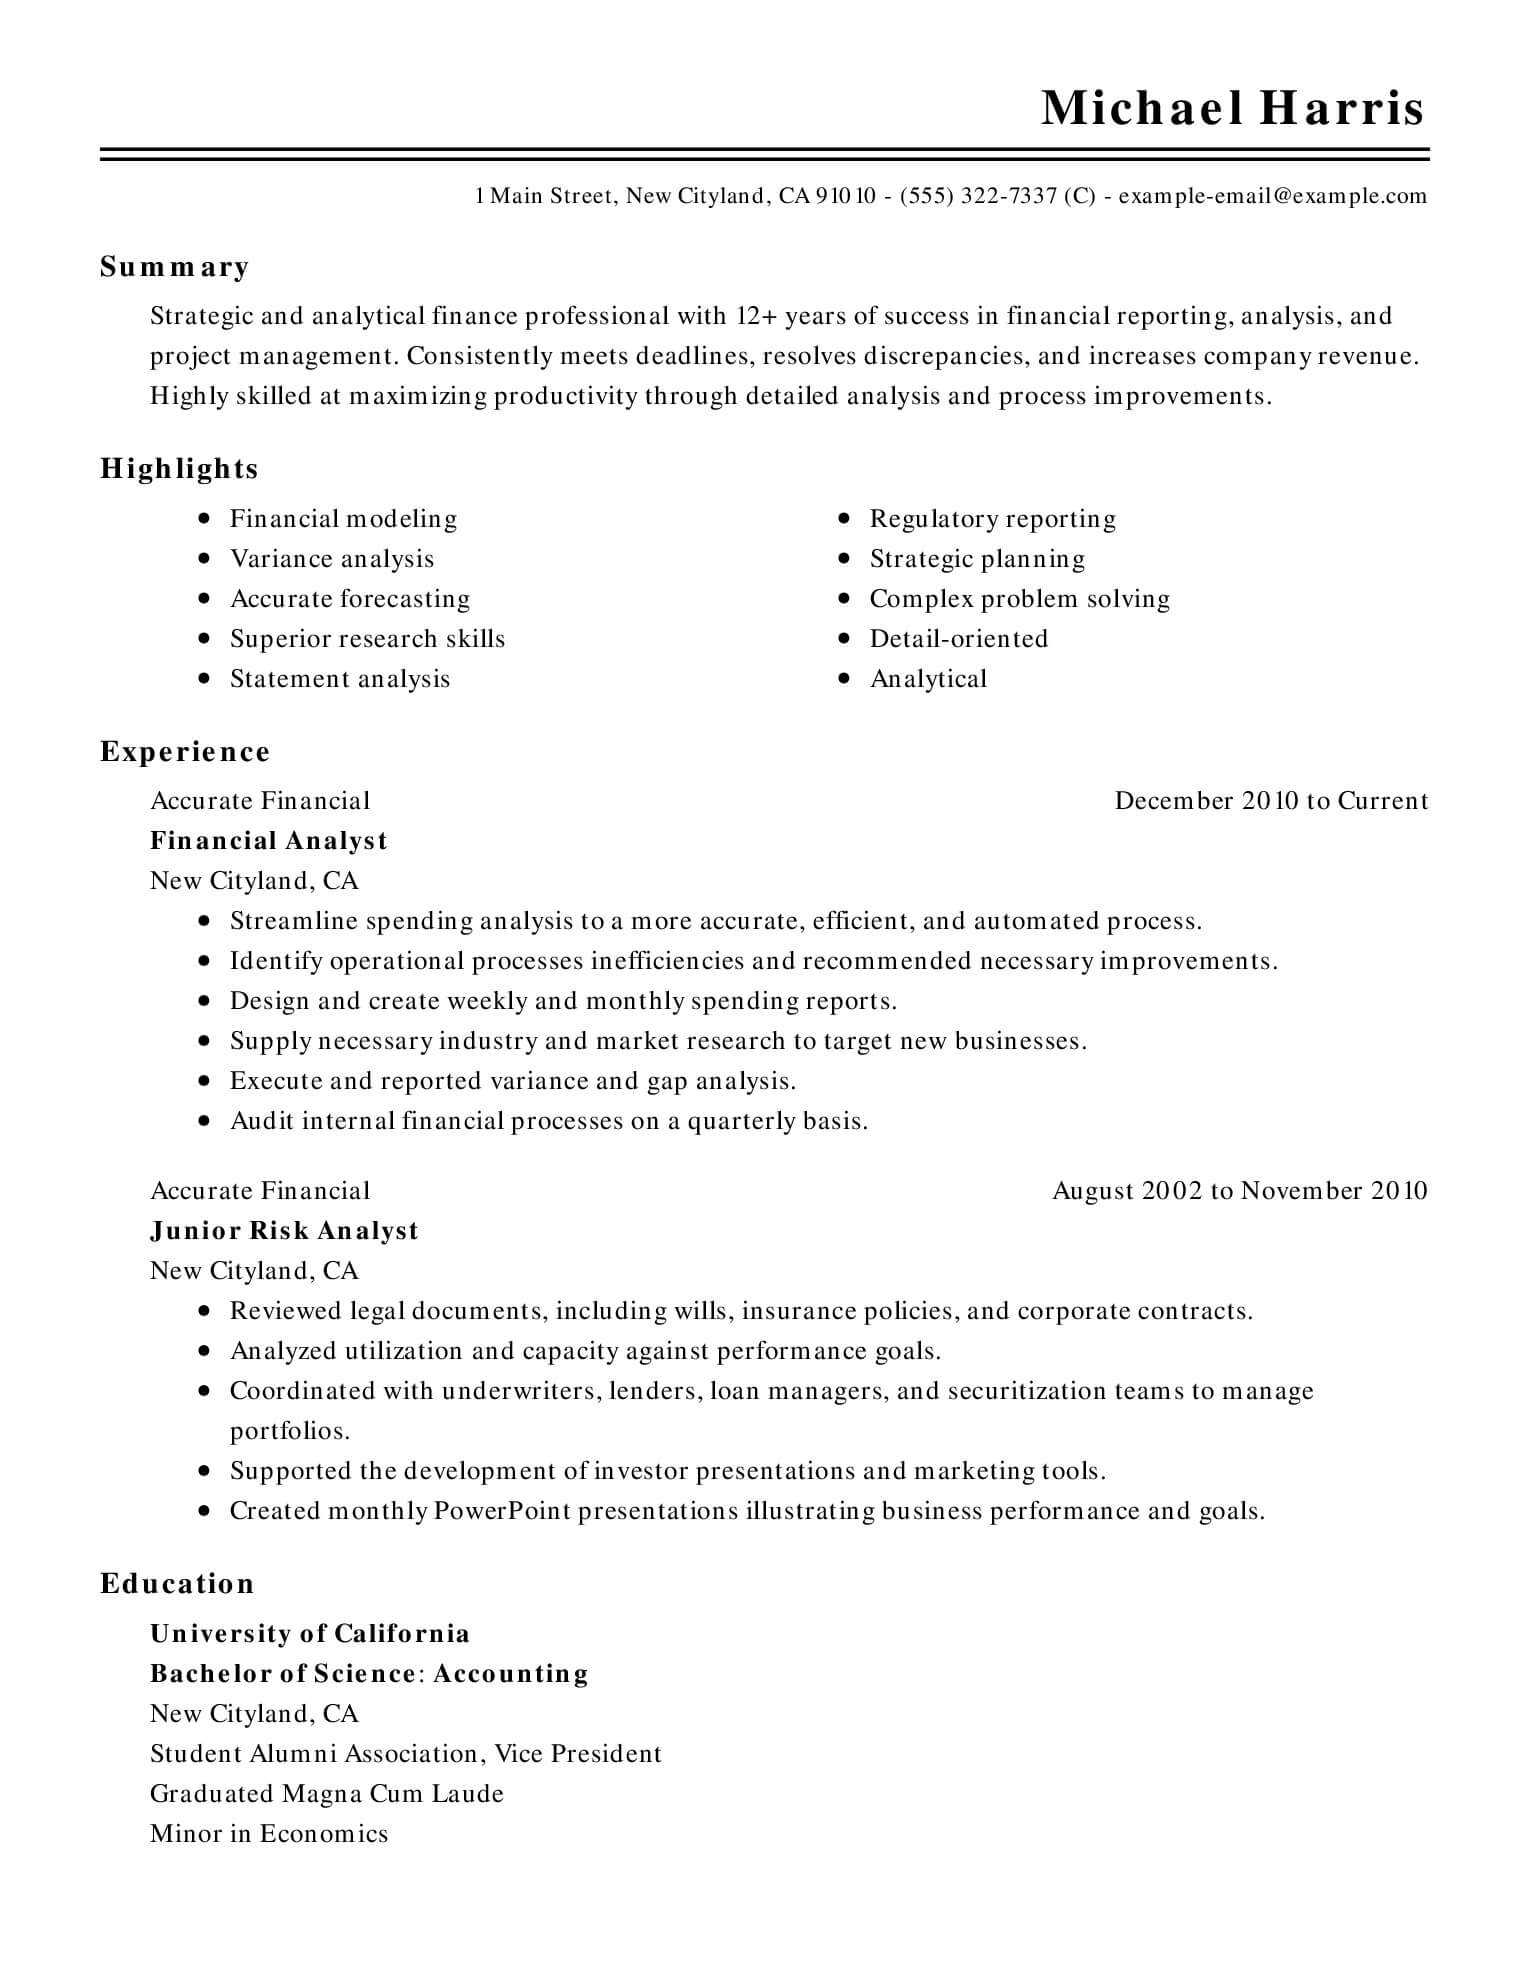 Basic Resume Template For Microsoft Word | Livecareer Within Simple Resume Template Microsoft Word